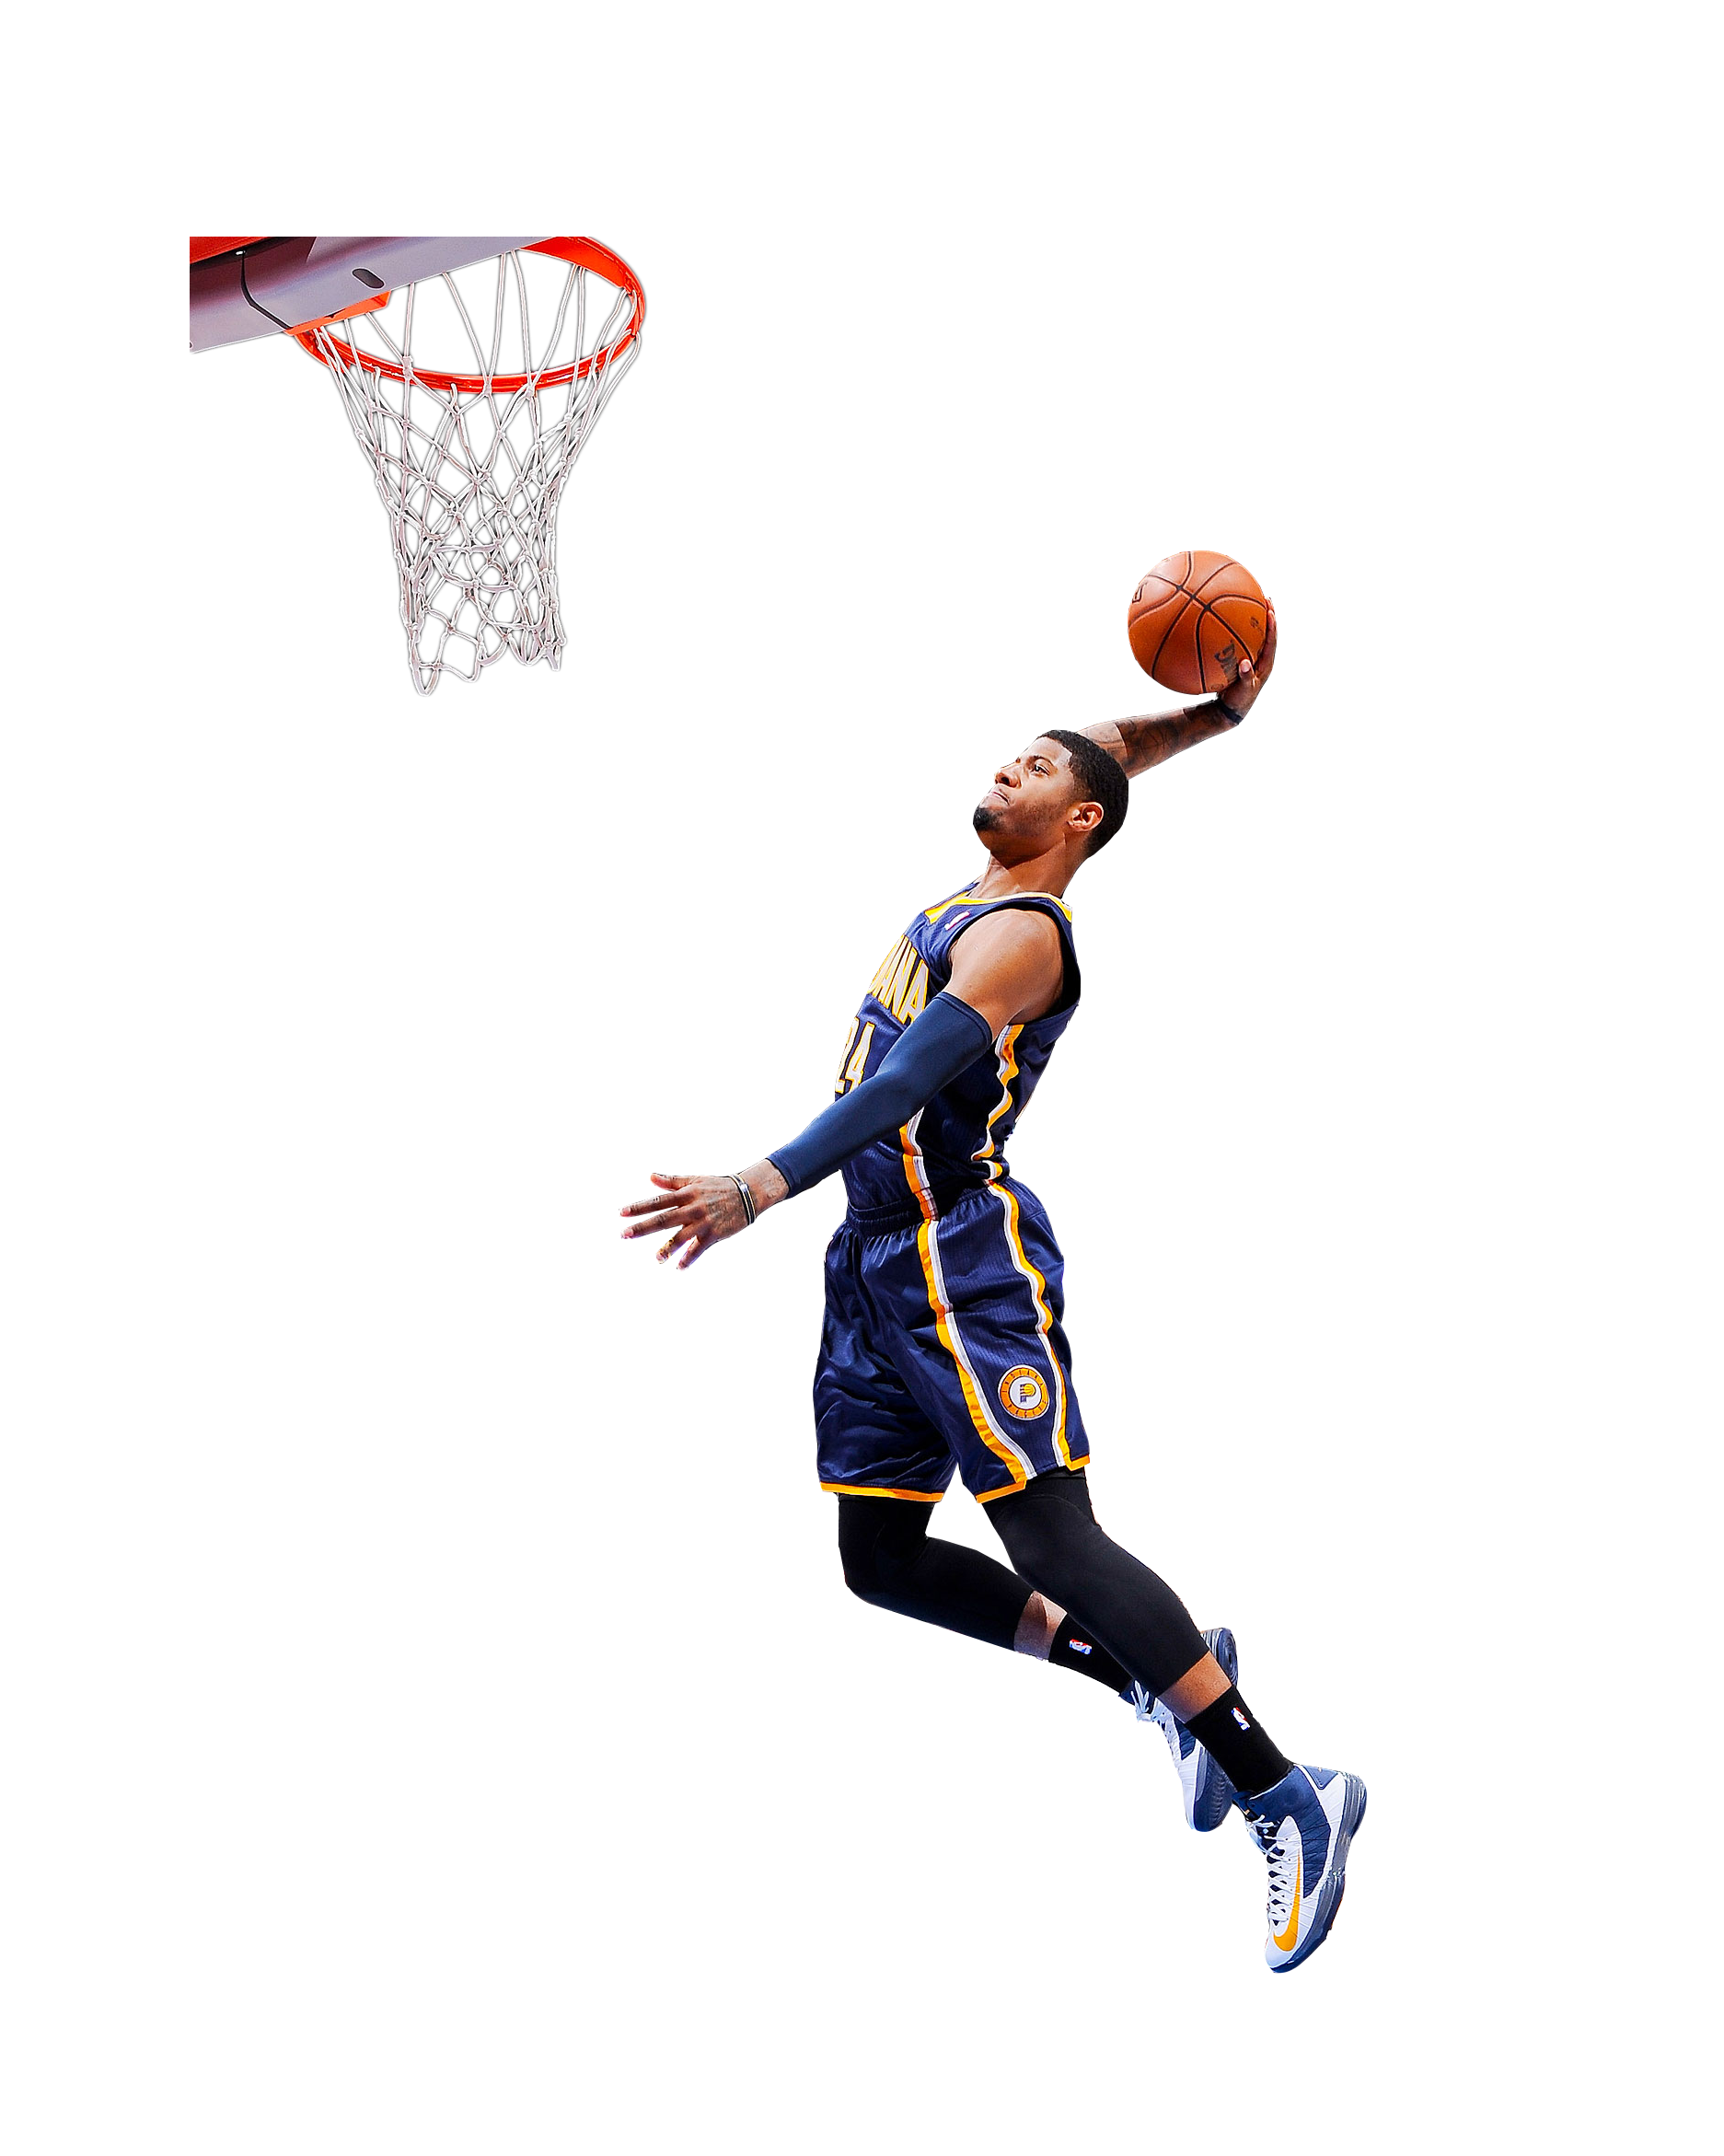 Basketball Dunk PNG Image in Transparent - Basketball Png